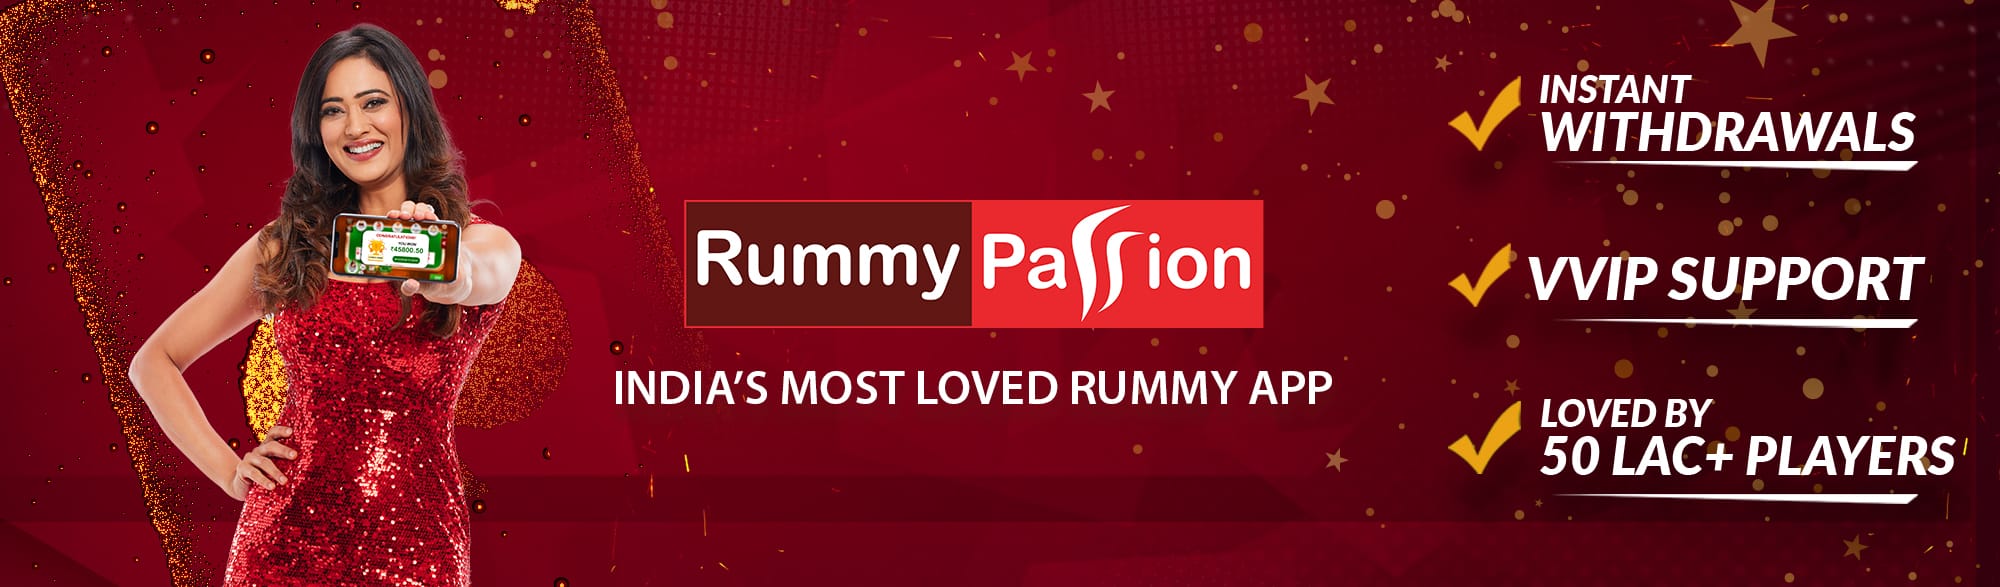 Rummy Passion promotional banner, "India's most loved Rummy app."